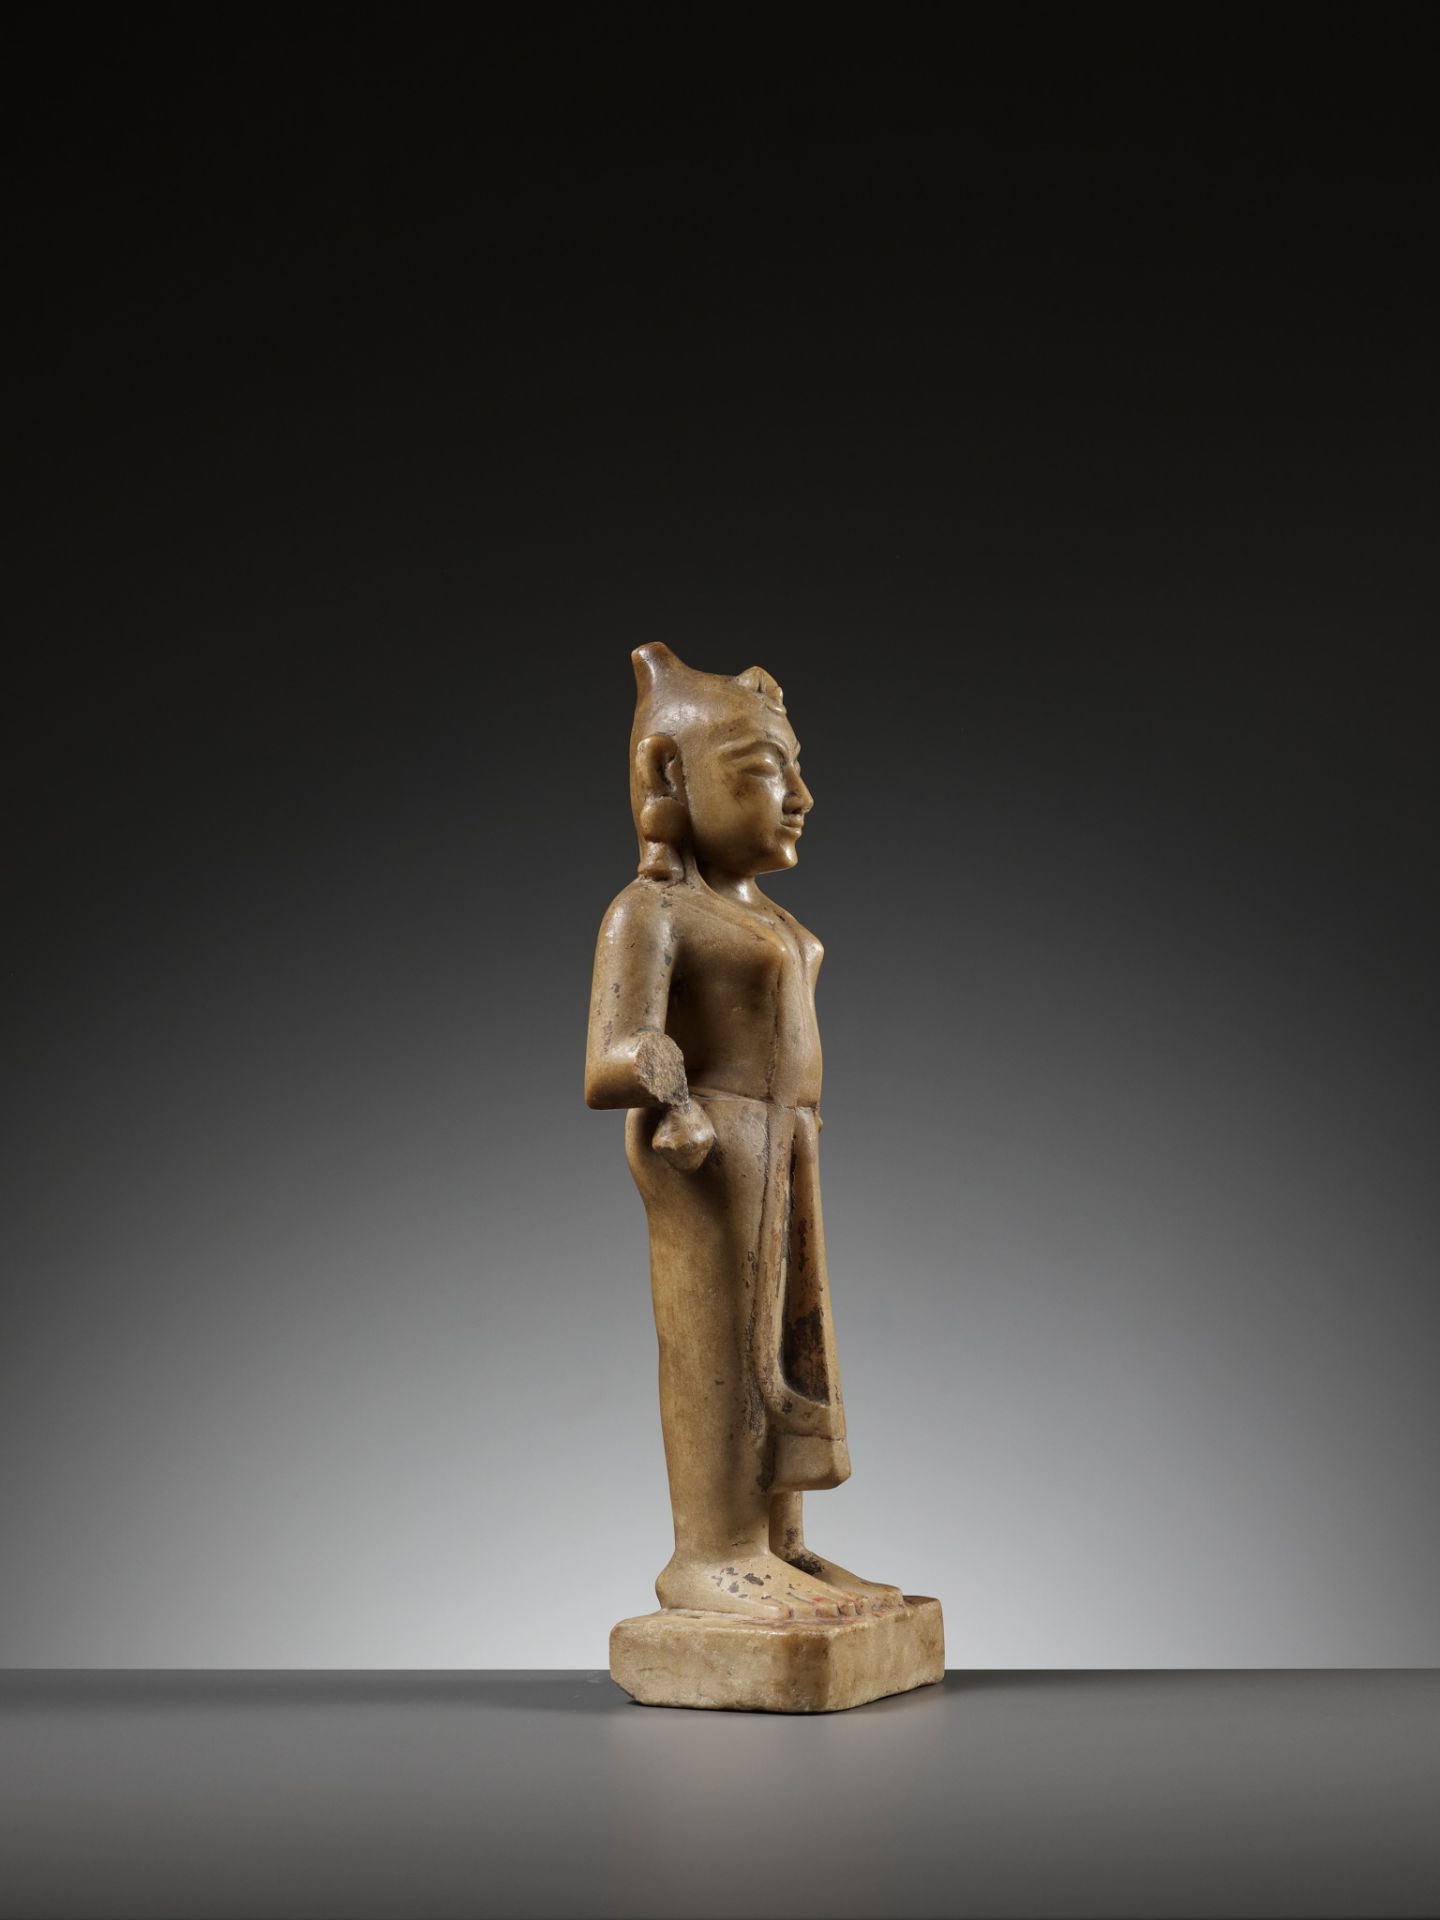 A MARBLE FIGURE OF RADHA, WESTERN INDIA, GUJARAT, 13TH-15TH CENTURY - Image 9 of 13